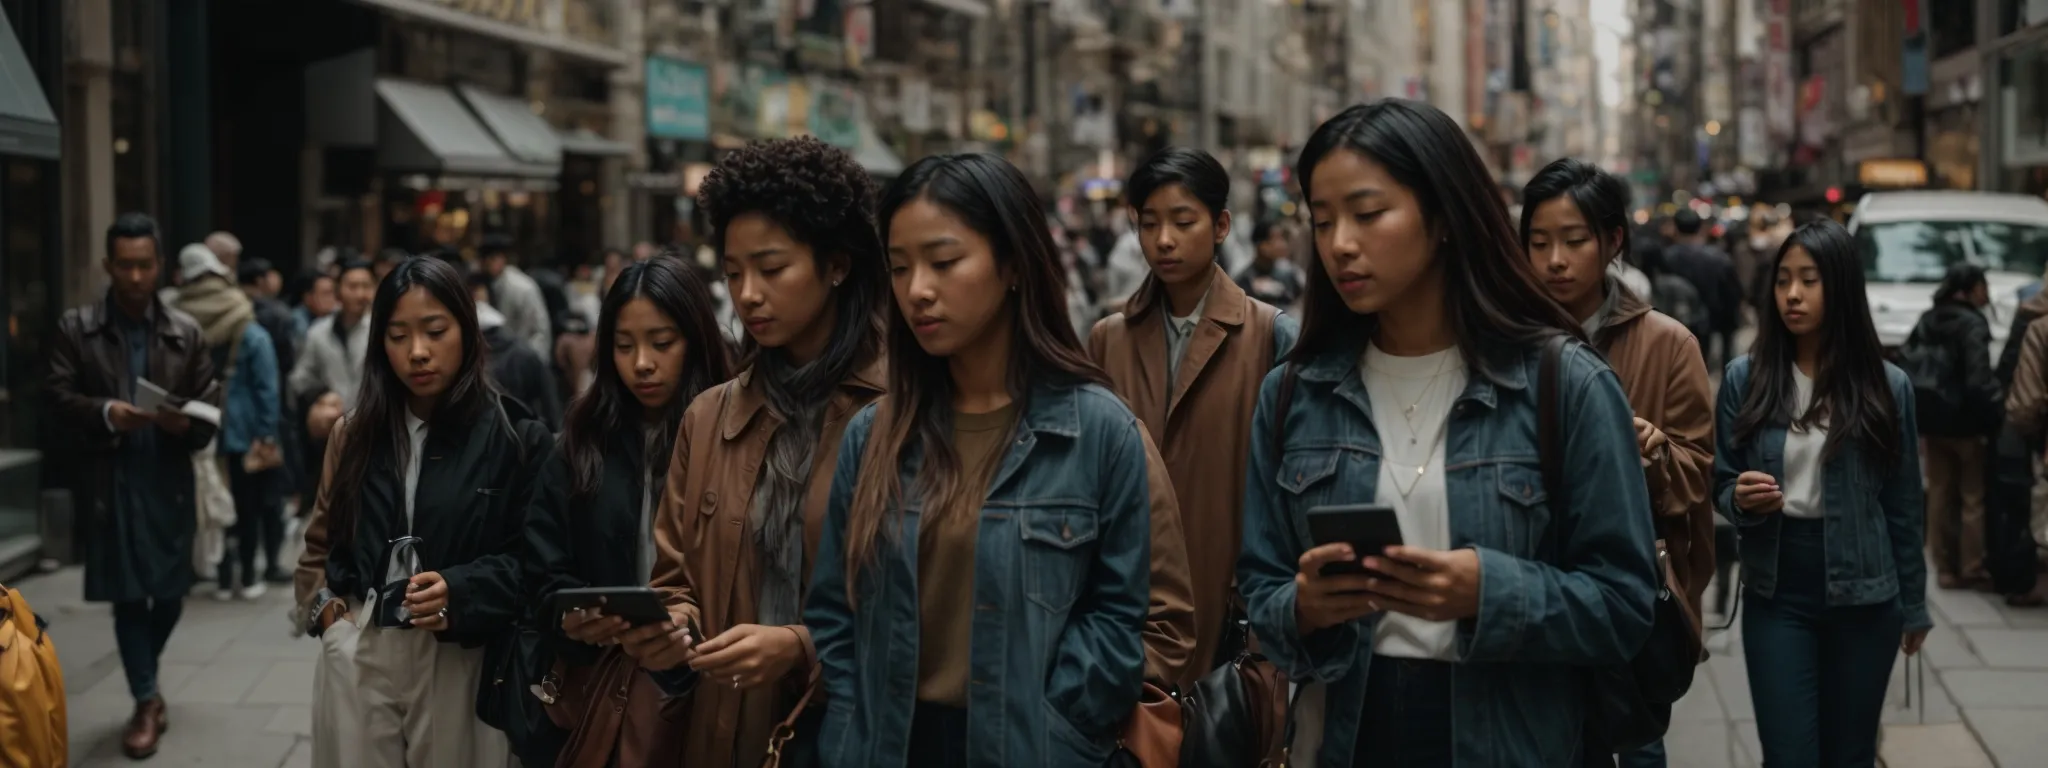 a group of diverse people intently browsing on their smartphones while walking down a bustling city street.